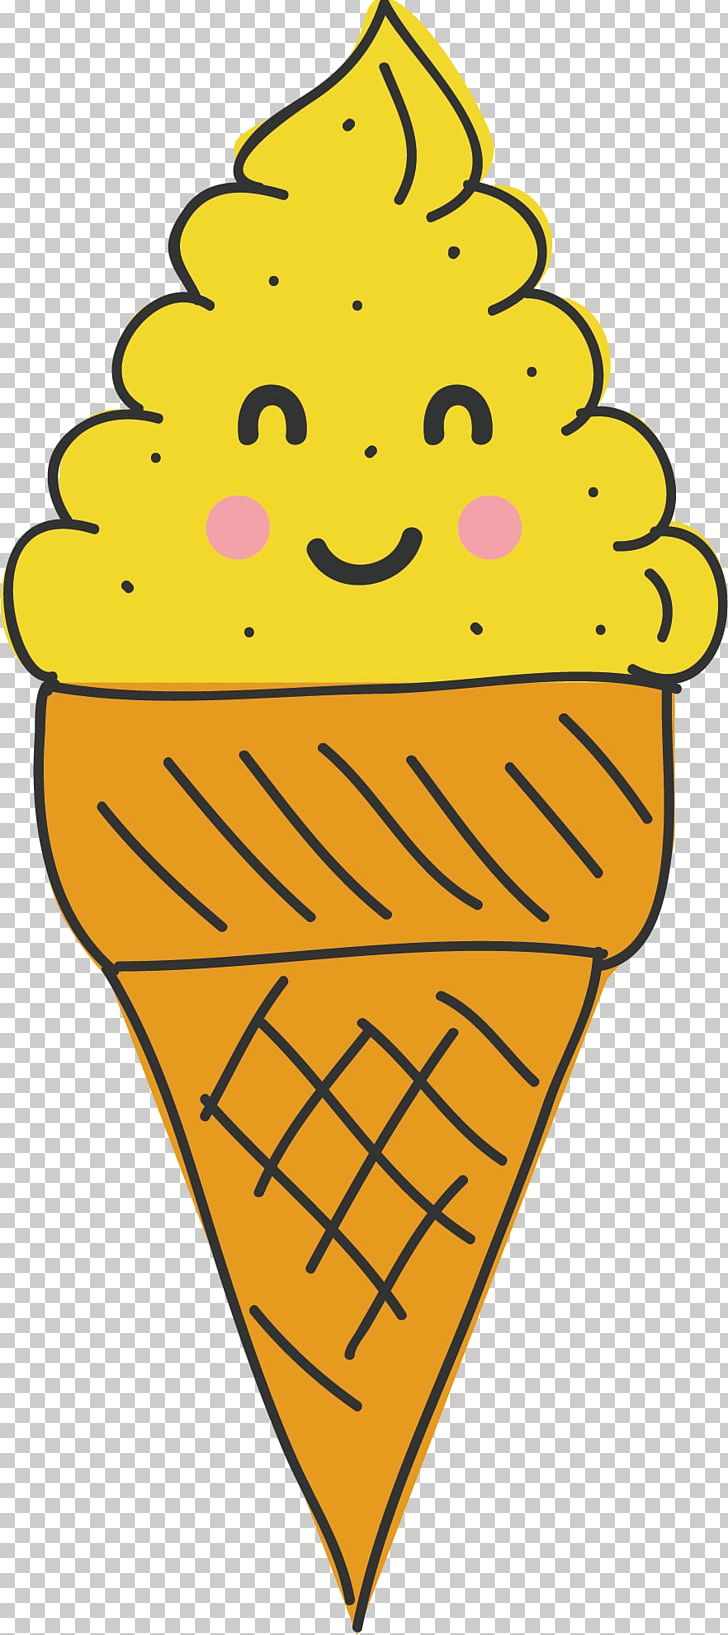 Ice Cream Biscuit Roll PNG, Clipart, Art, Black And White, Chocolate, Comics, Cream Free PNG Download